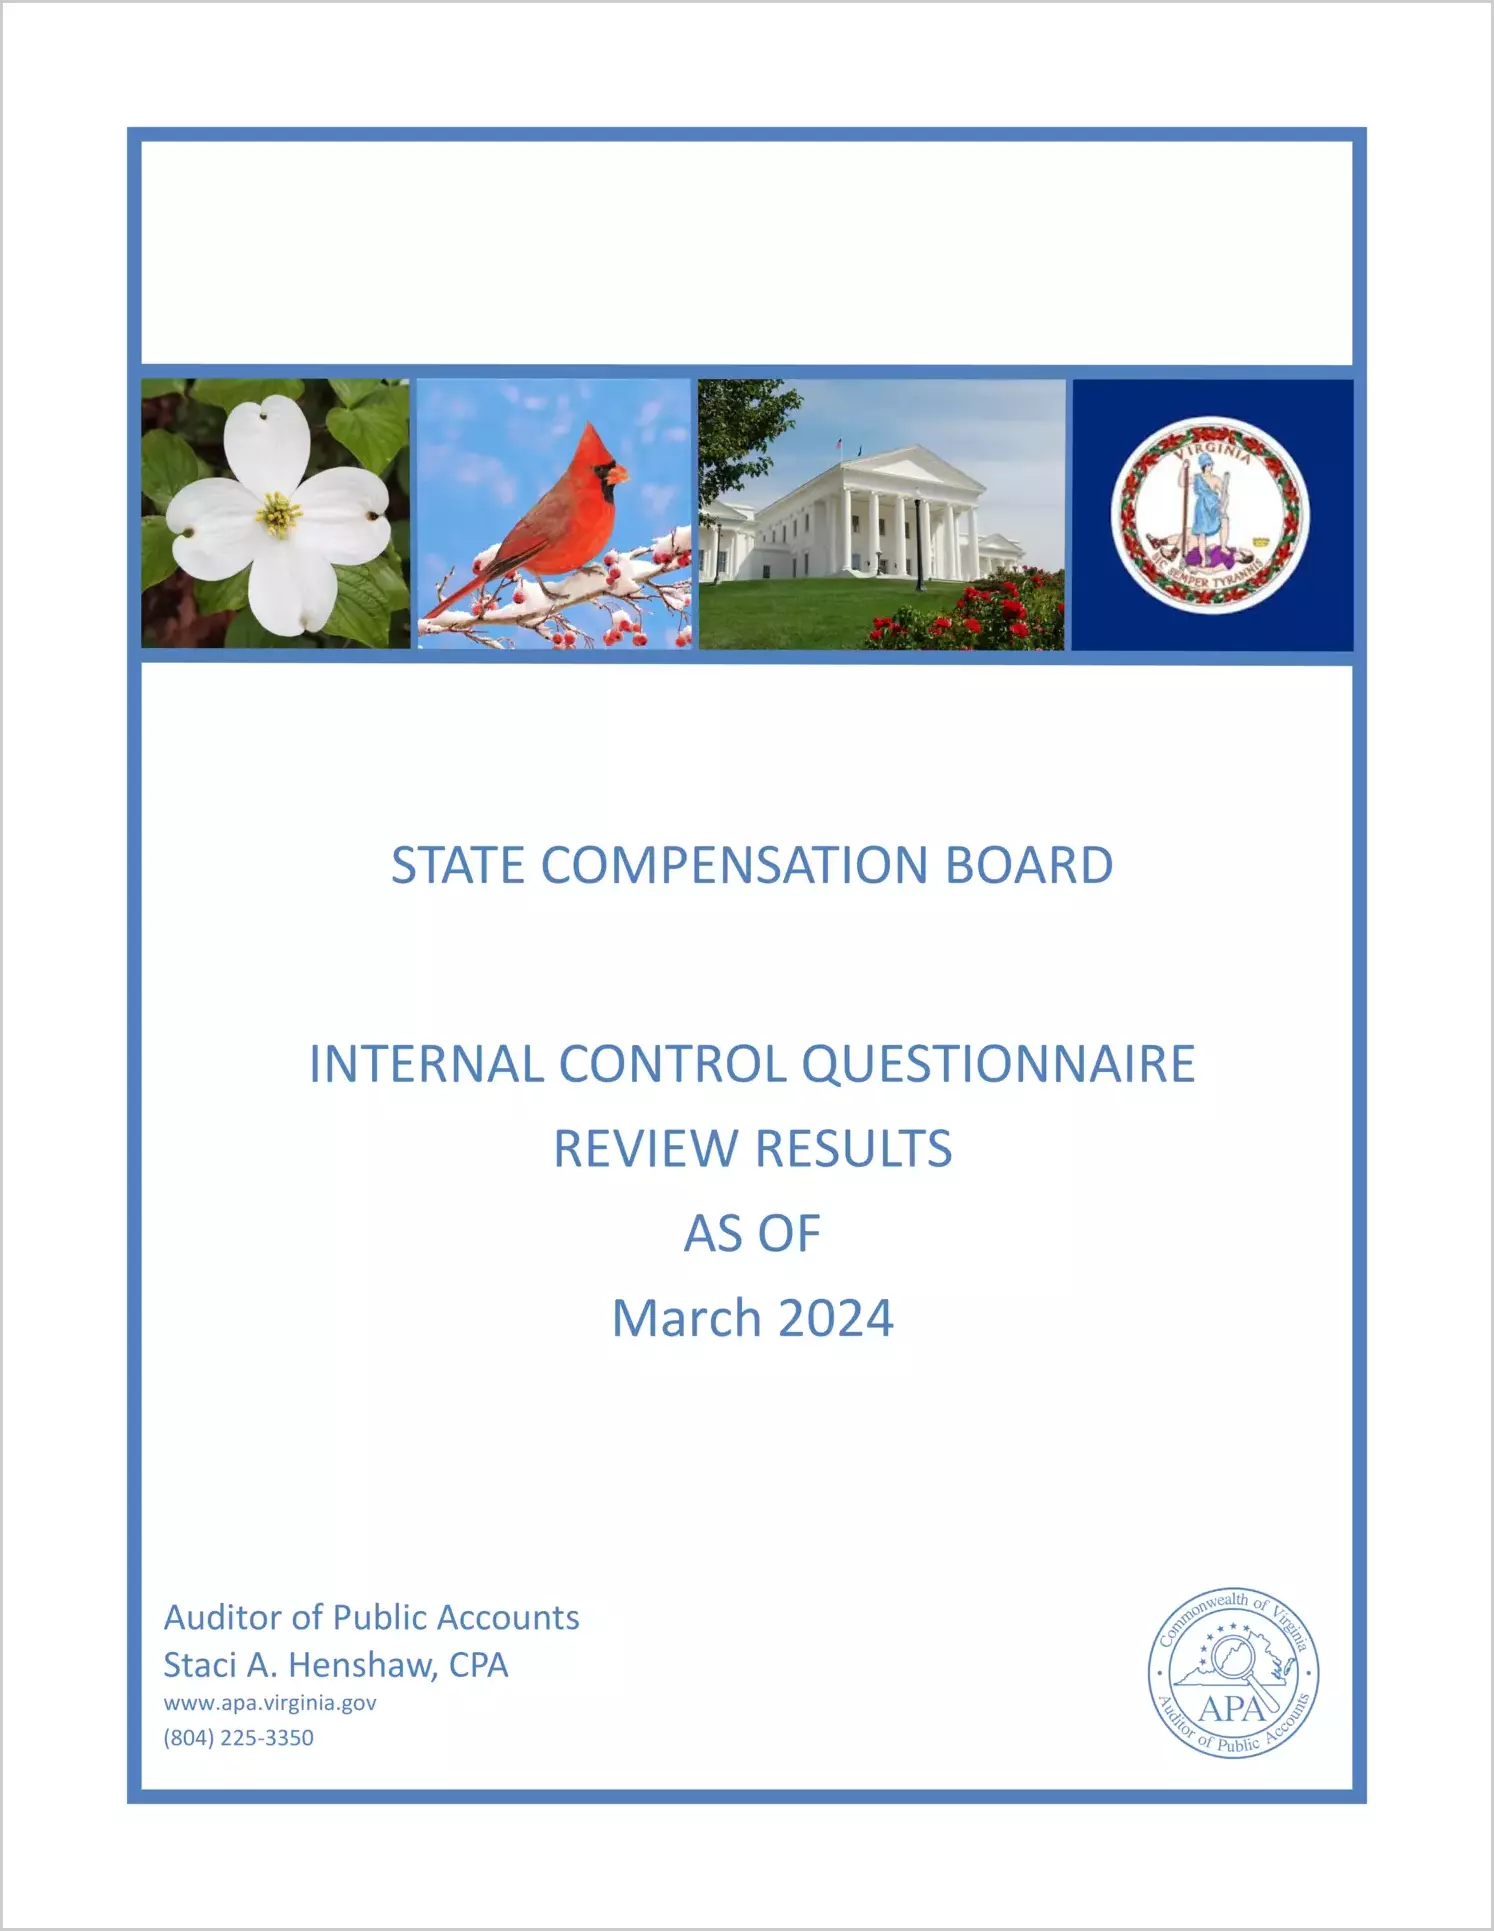 State Compensation Board Internal Control Questionnaire Review Results as of March 2024